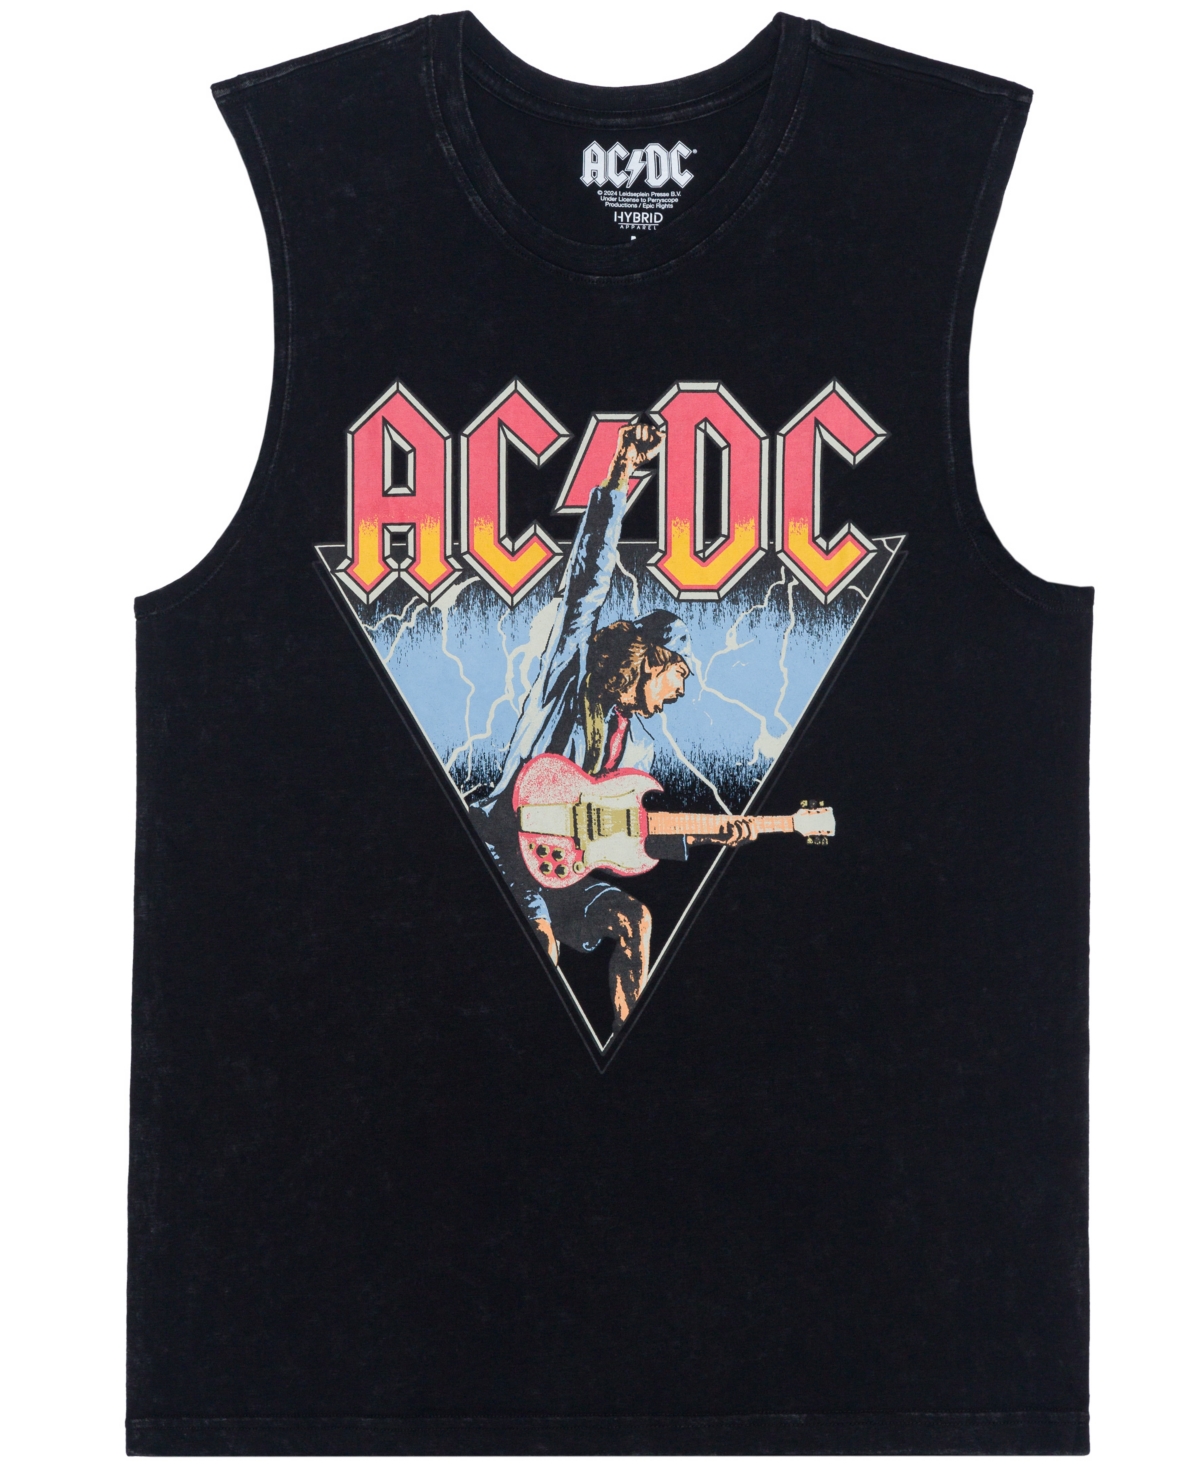 Men's Acdc Graphic Muscle Tank Top - Black Mine